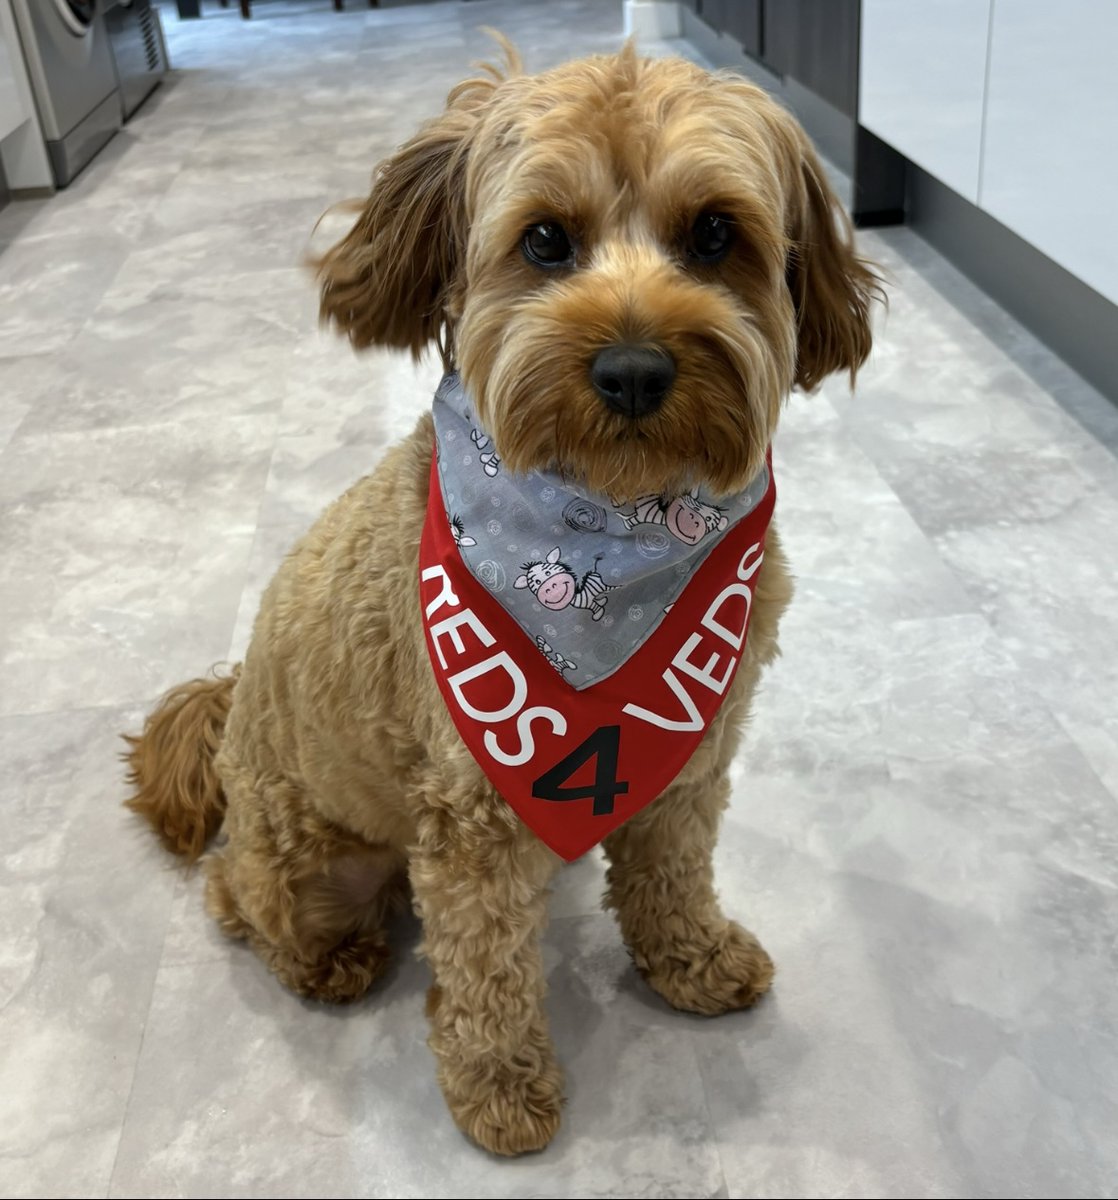 Happy #REDS4VEDS Day from Lola G, head of staff morale at AC HQ. ❤ Don't forget to share your furry loved ones wearing red today to support a pawfect REDS4VEDS. 🐾🐾